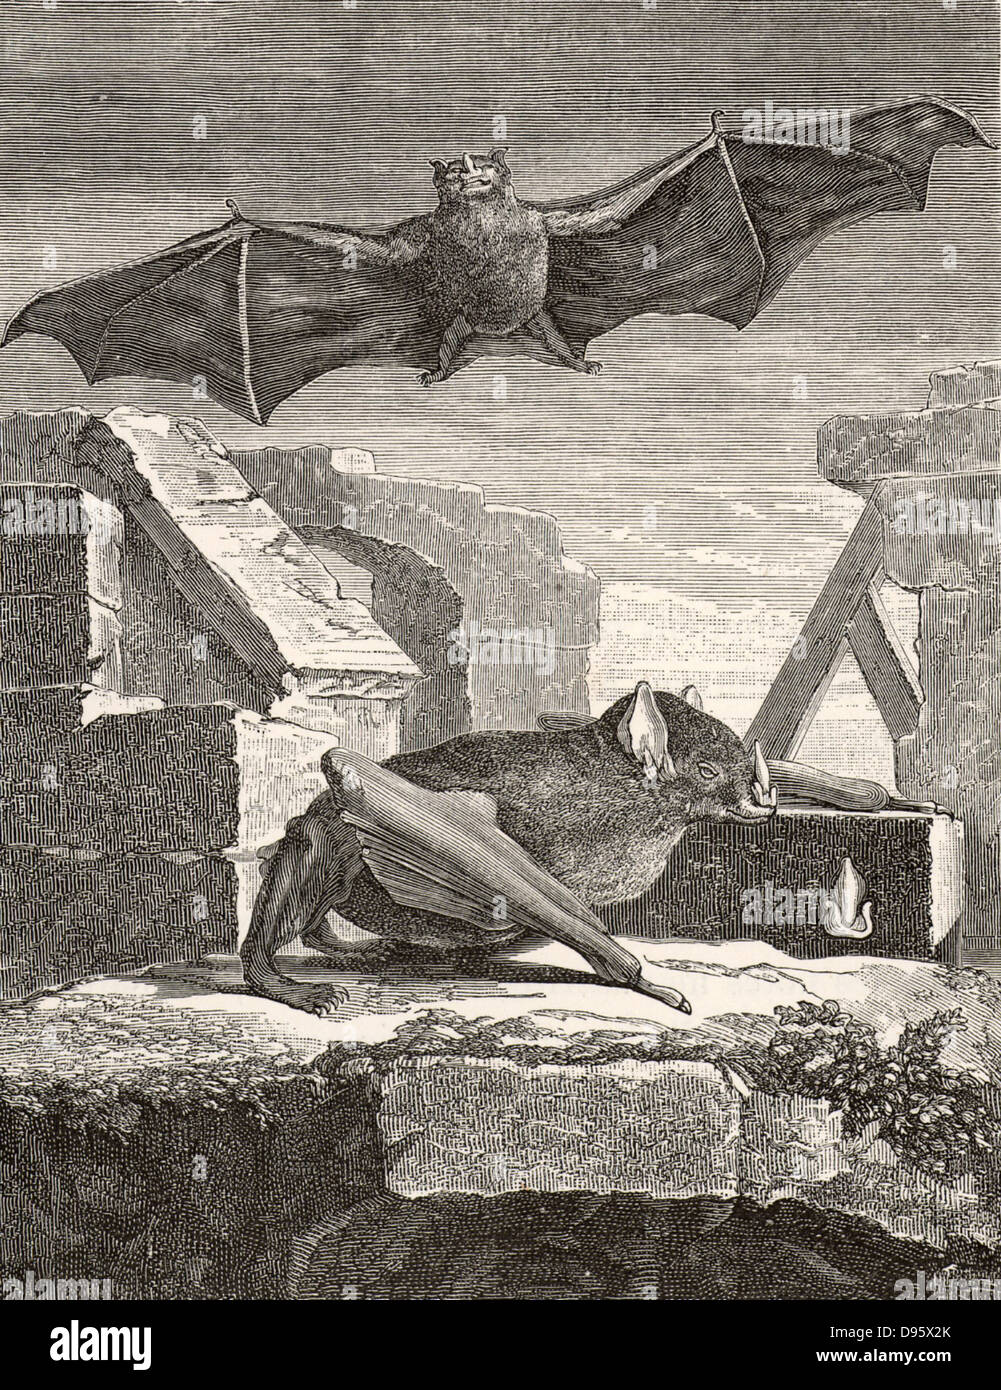 The Great Vampire Bat from Guyana. Engraving from 'Histoire Naturelle' by George-Louis Leclerc, Comte de Buffon  (Paris, 1749-1767). Stock Photo